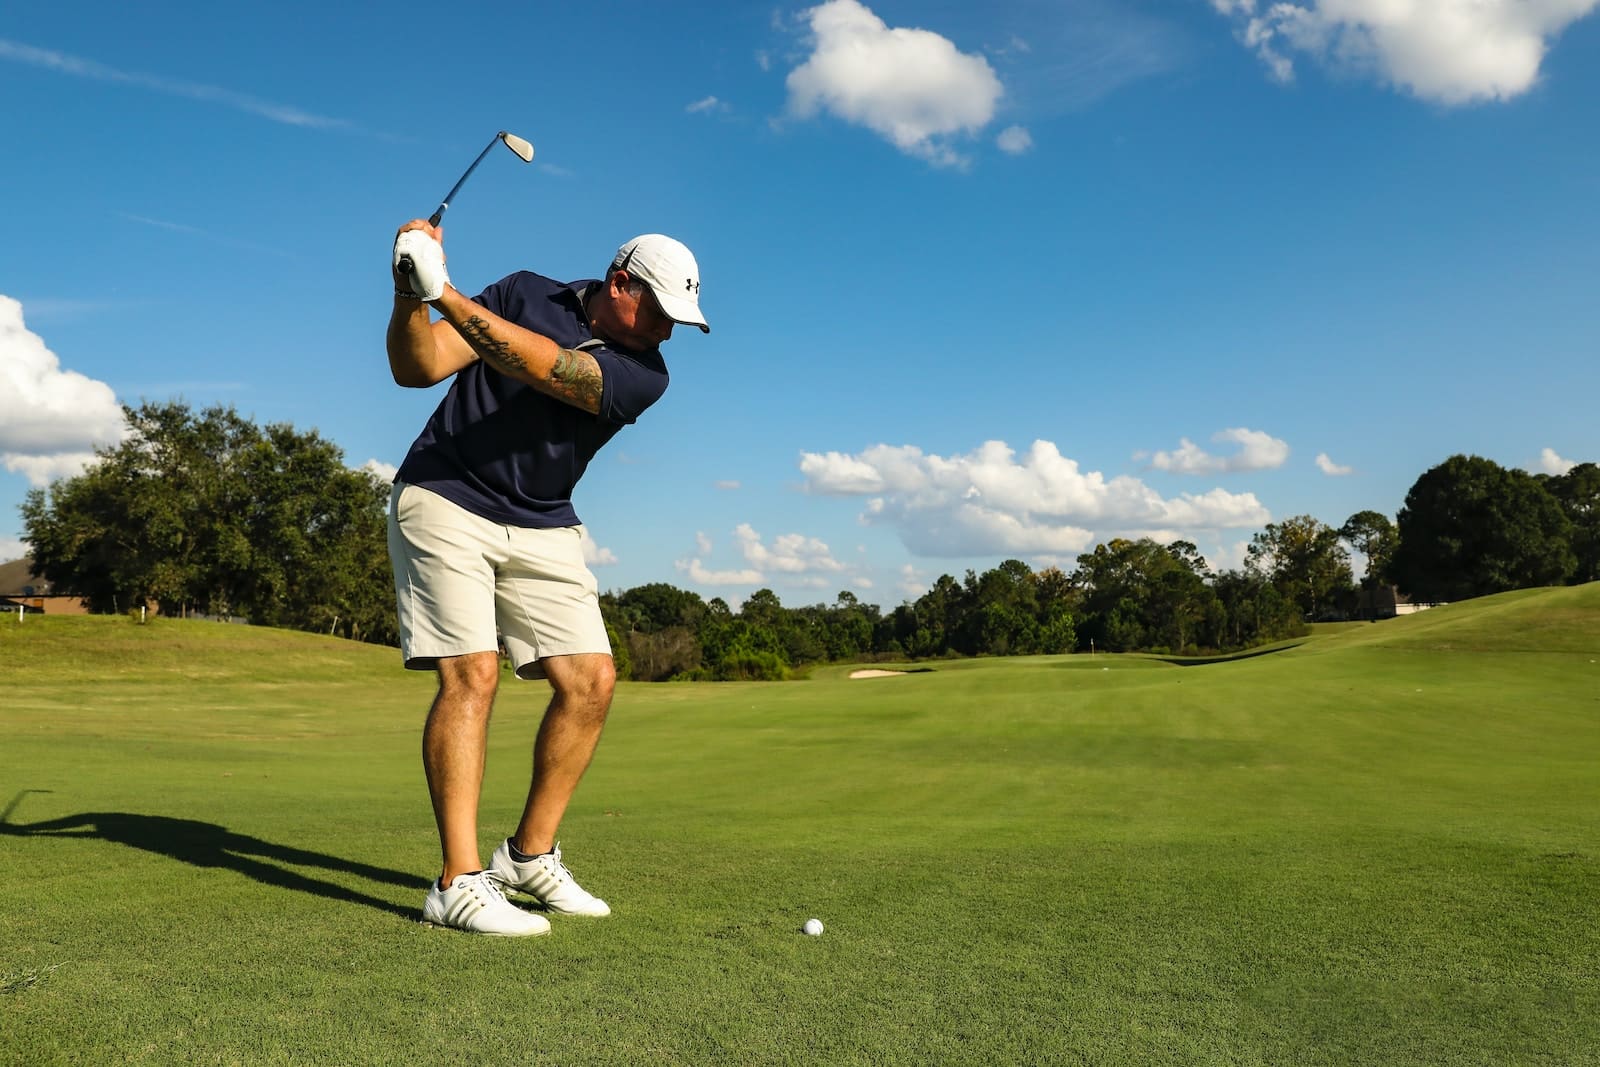 Swing into Golf without Lower Back Pain – with golf physio treatments at Sheddon Oakville and Burlington clinics